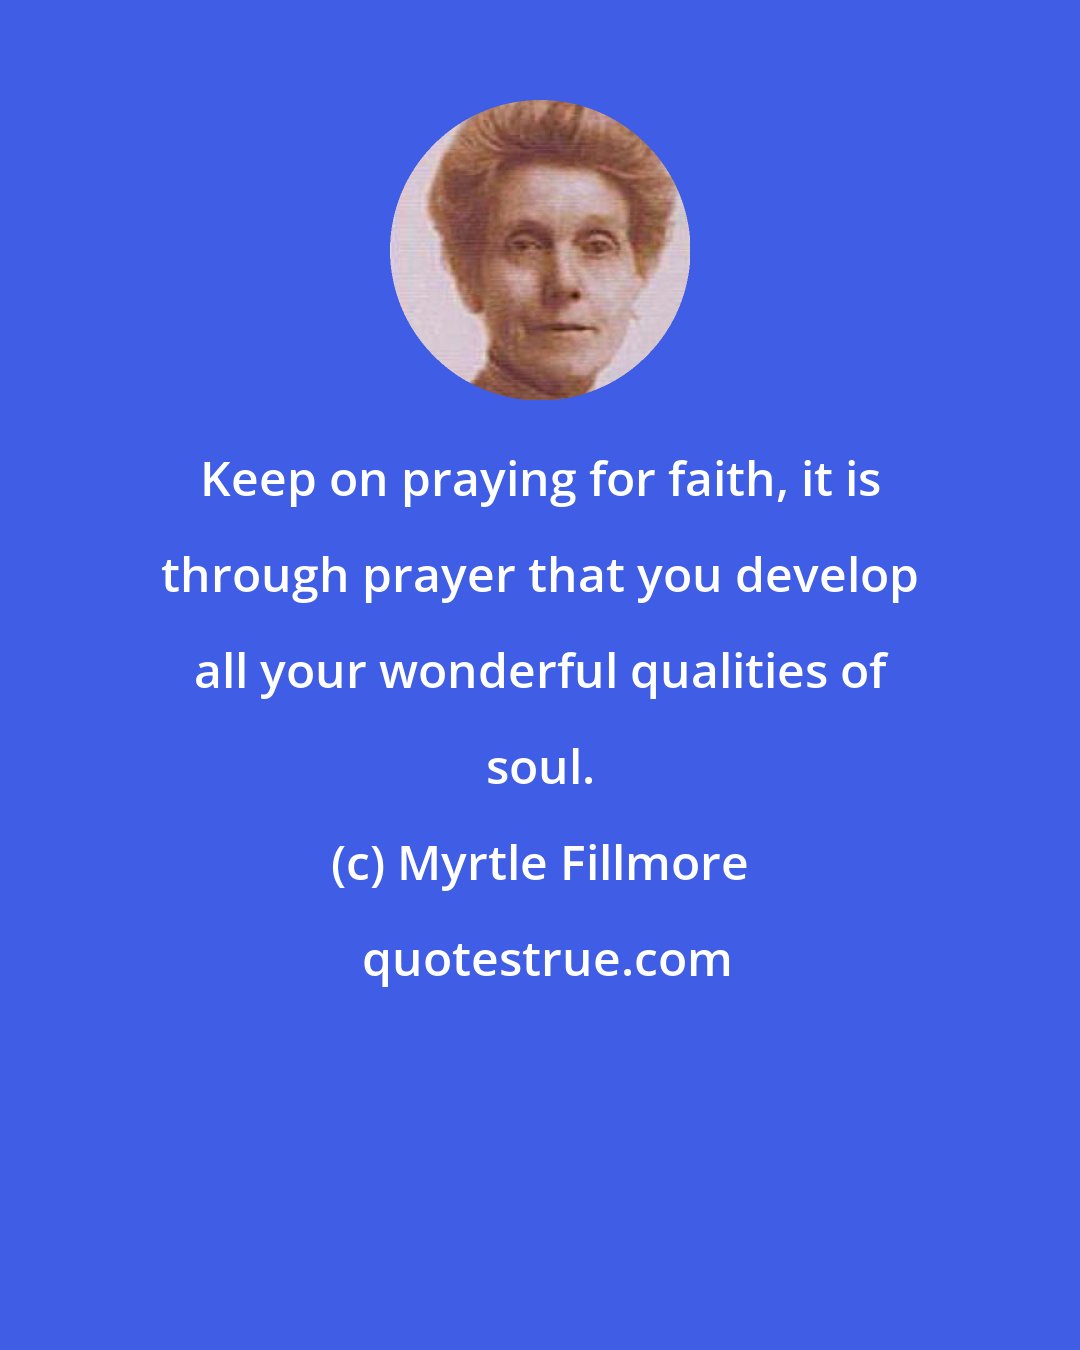 Myrtle Fillmore: Keep on praying for faith, it is through prayer that you develop all your wonderful qualities of soul.